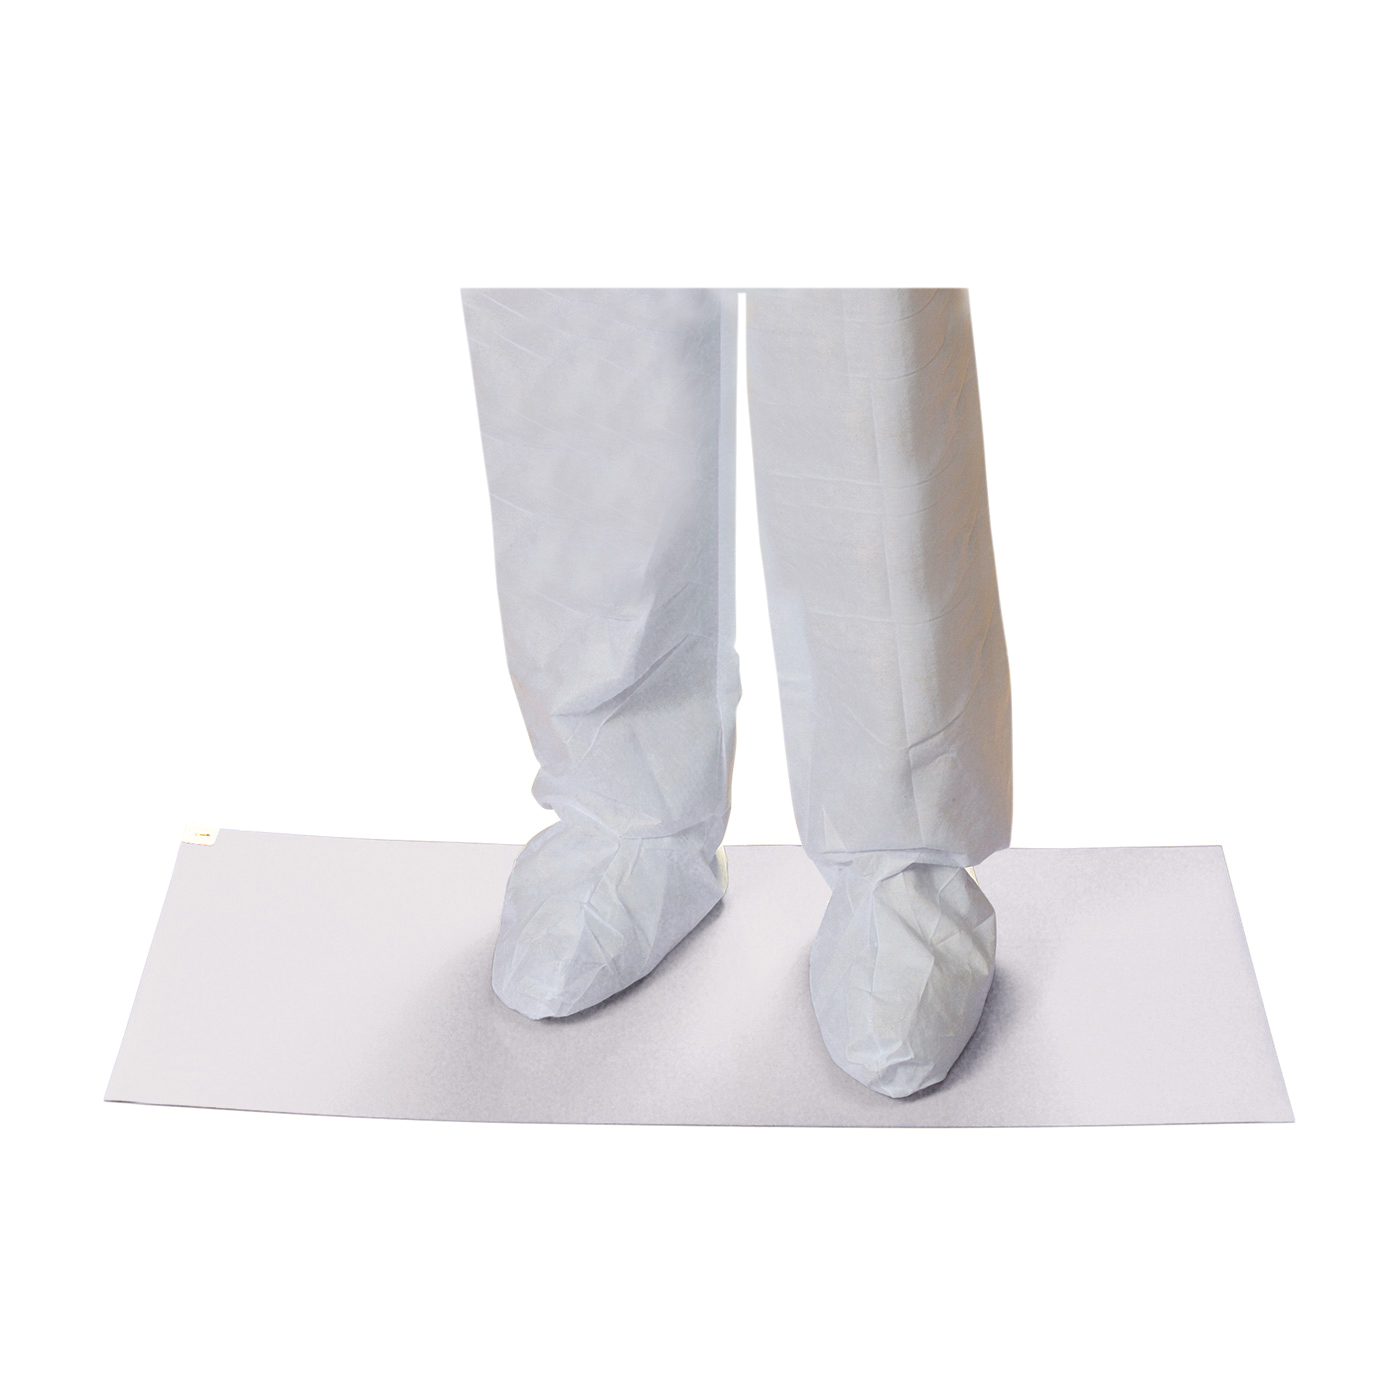 PIP® CleanTeam® 100-93-363638W Contamination Control Clean Room Mat, 36 in L x 36 in W x 0.05 mm THK, White, Polyethelene, 30 Sheets per Mat